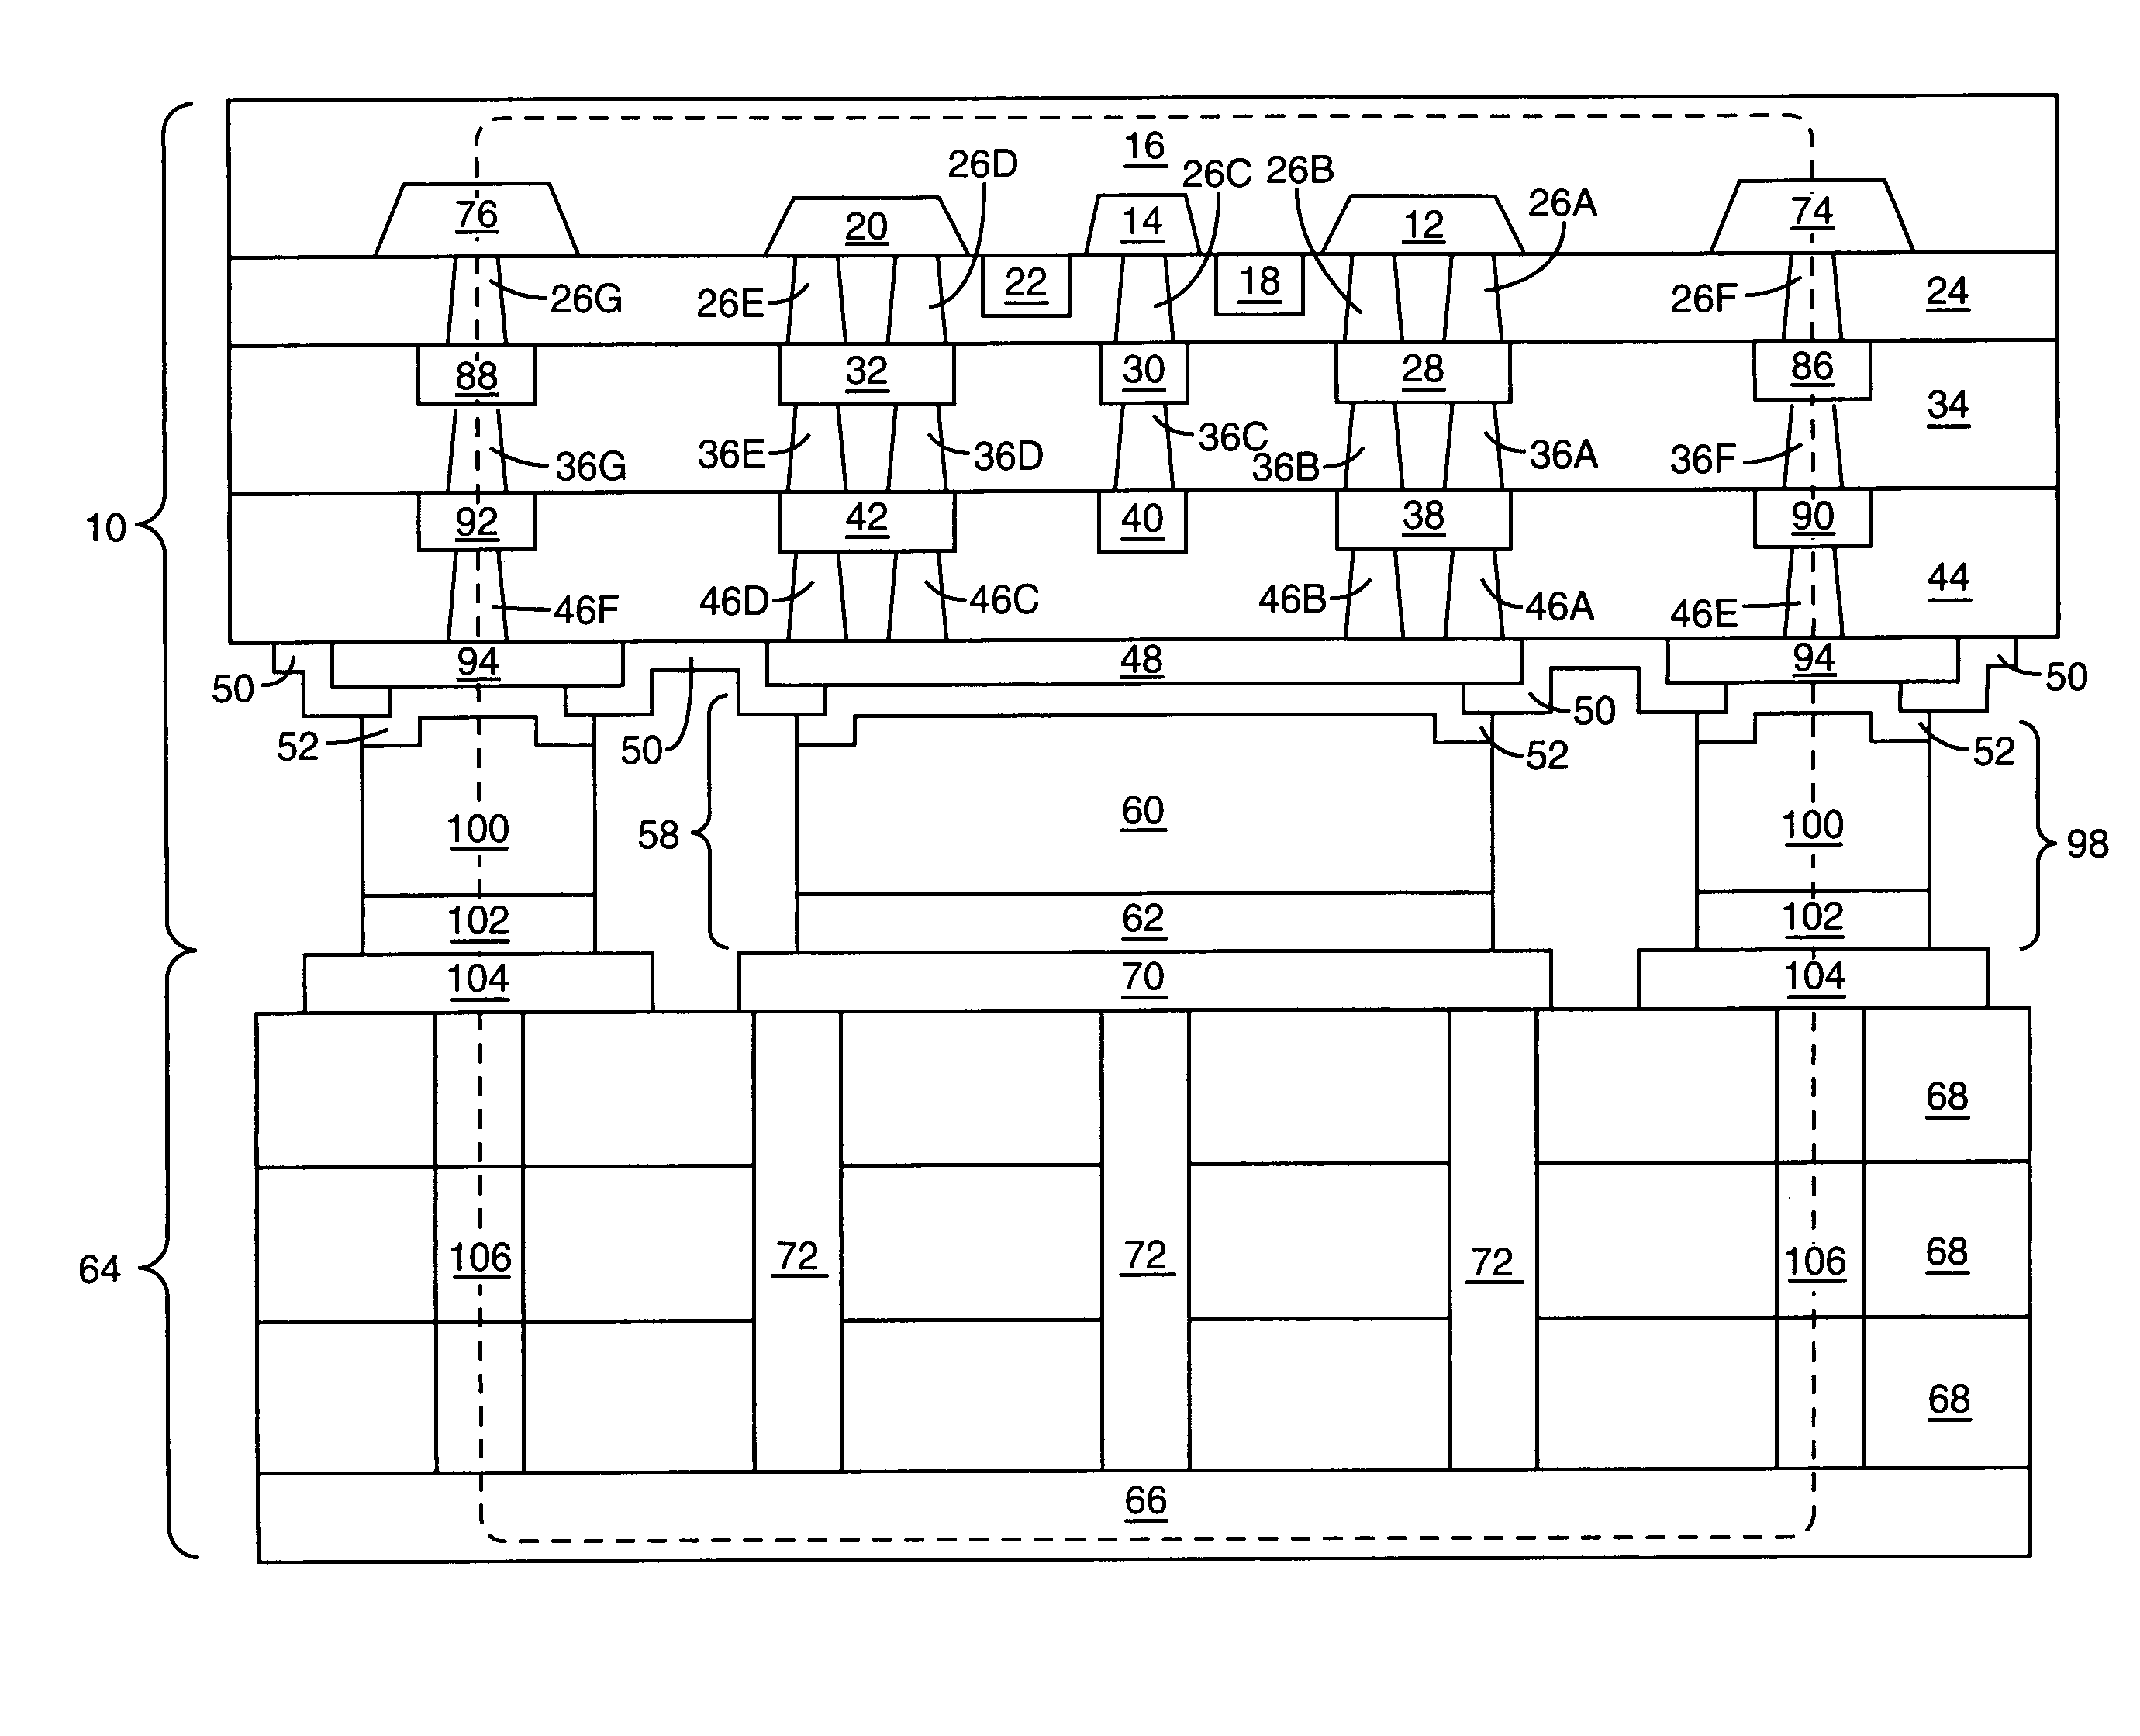 Integrated power devices and signal isolation structure